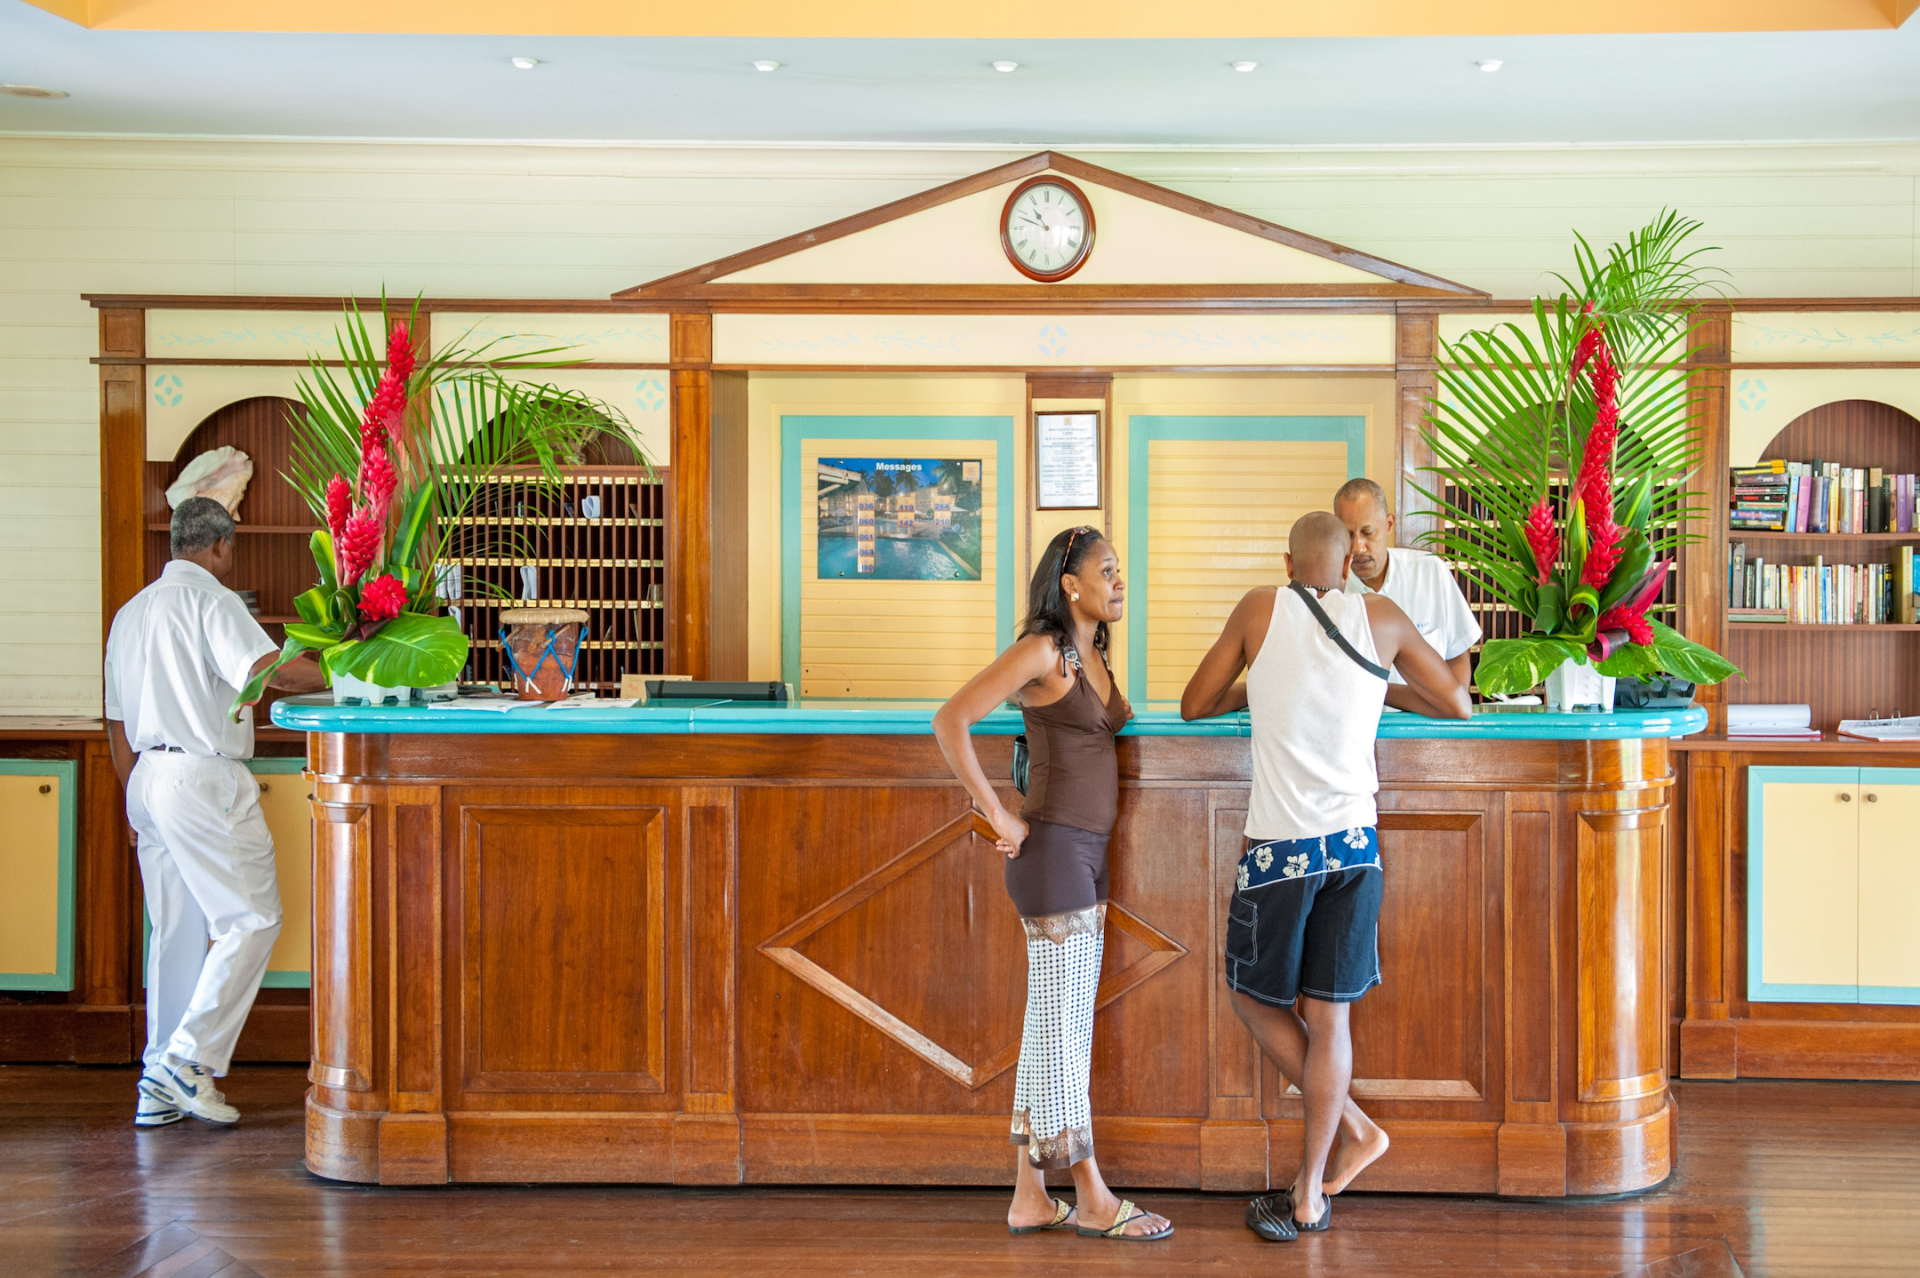 Hospitality industry concept - couple checking checking in in a hotel in the Caribbean.